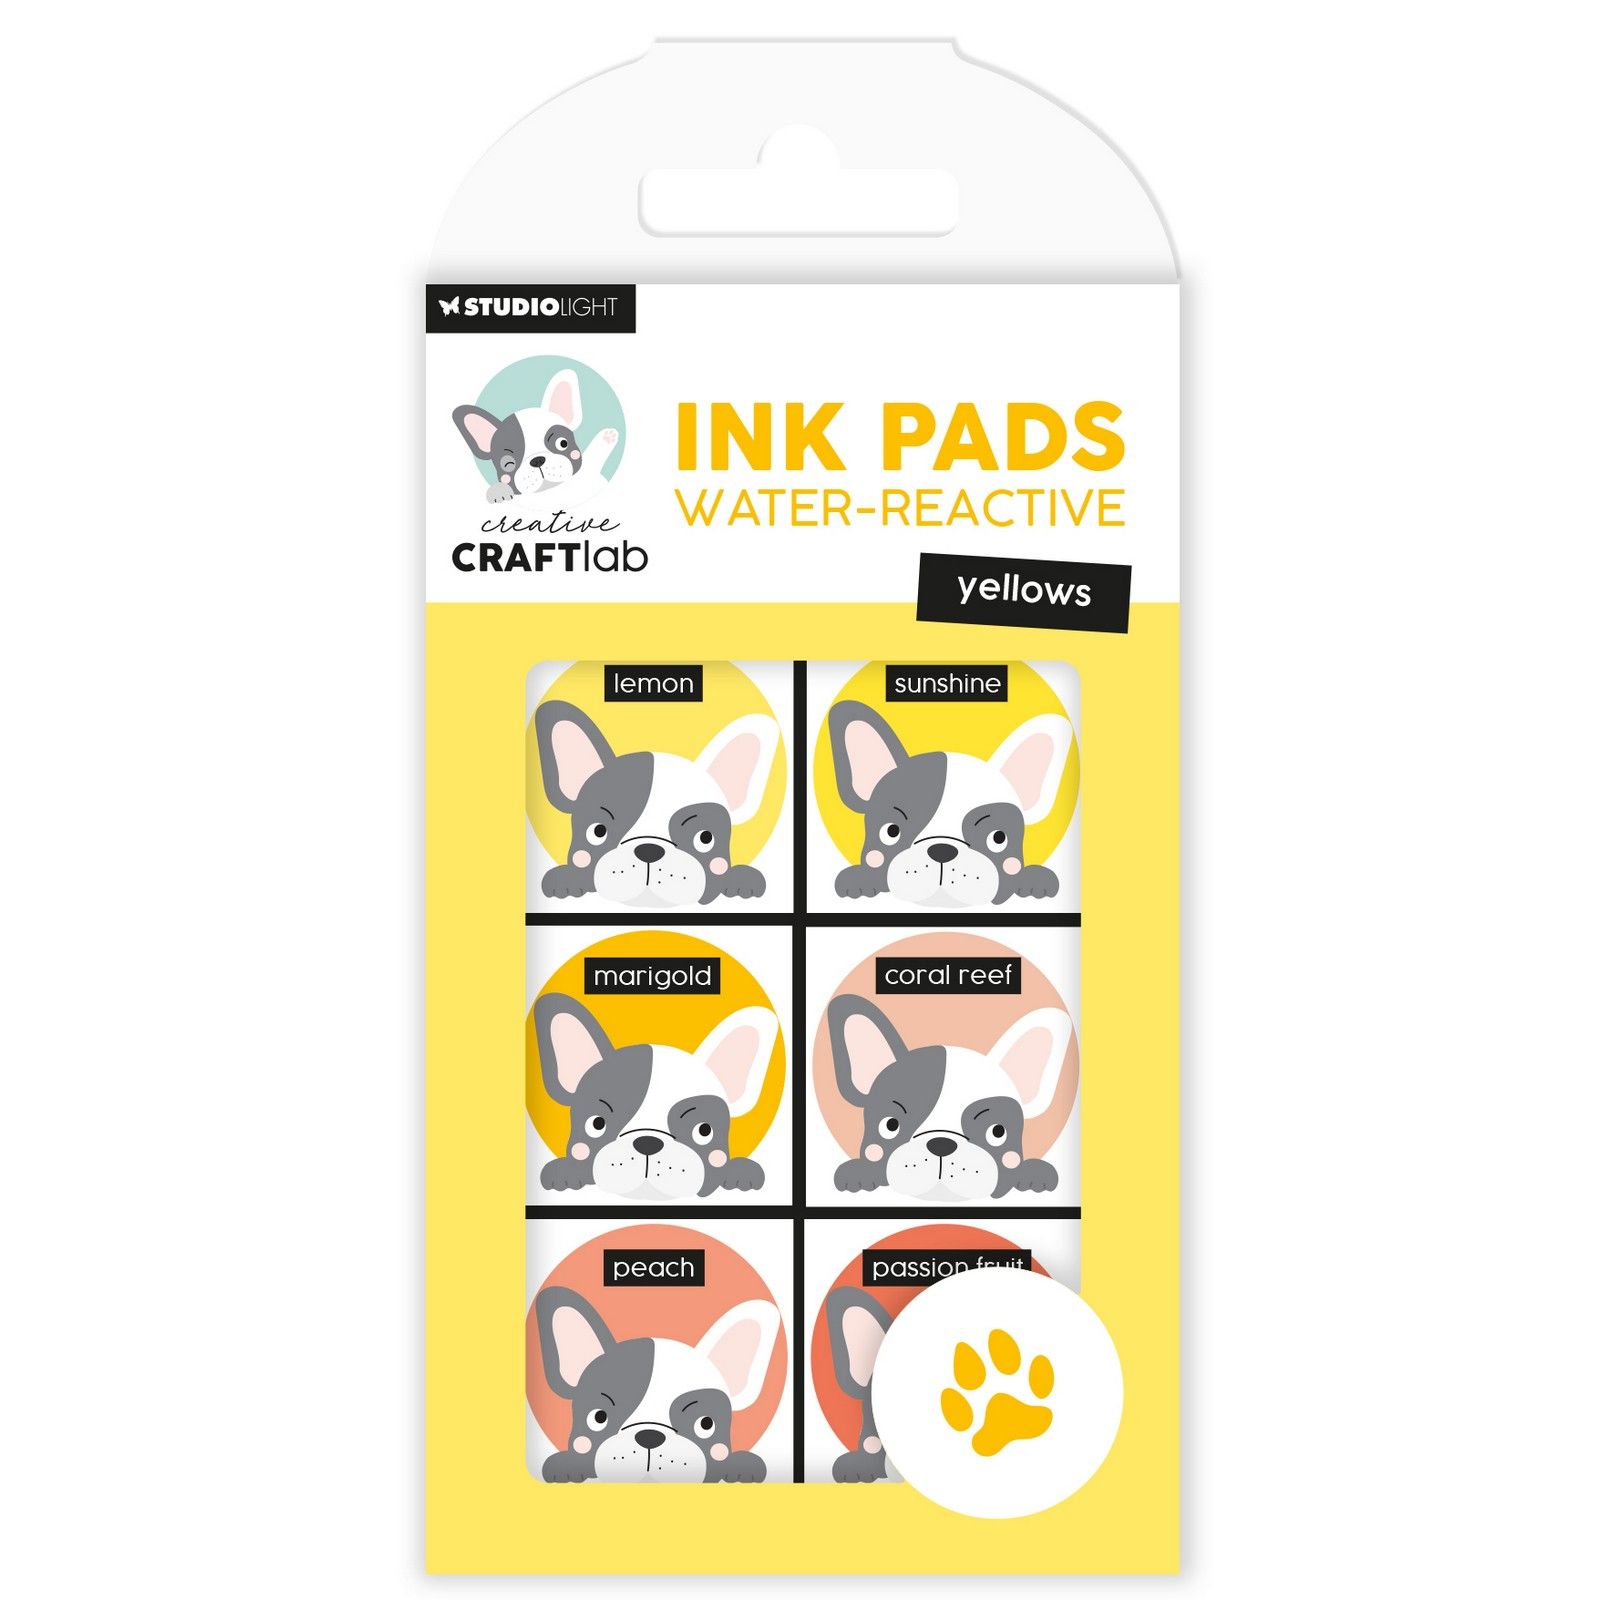 Creative Craftlab • Essentials Ink Pads Water-Reactive Yellows